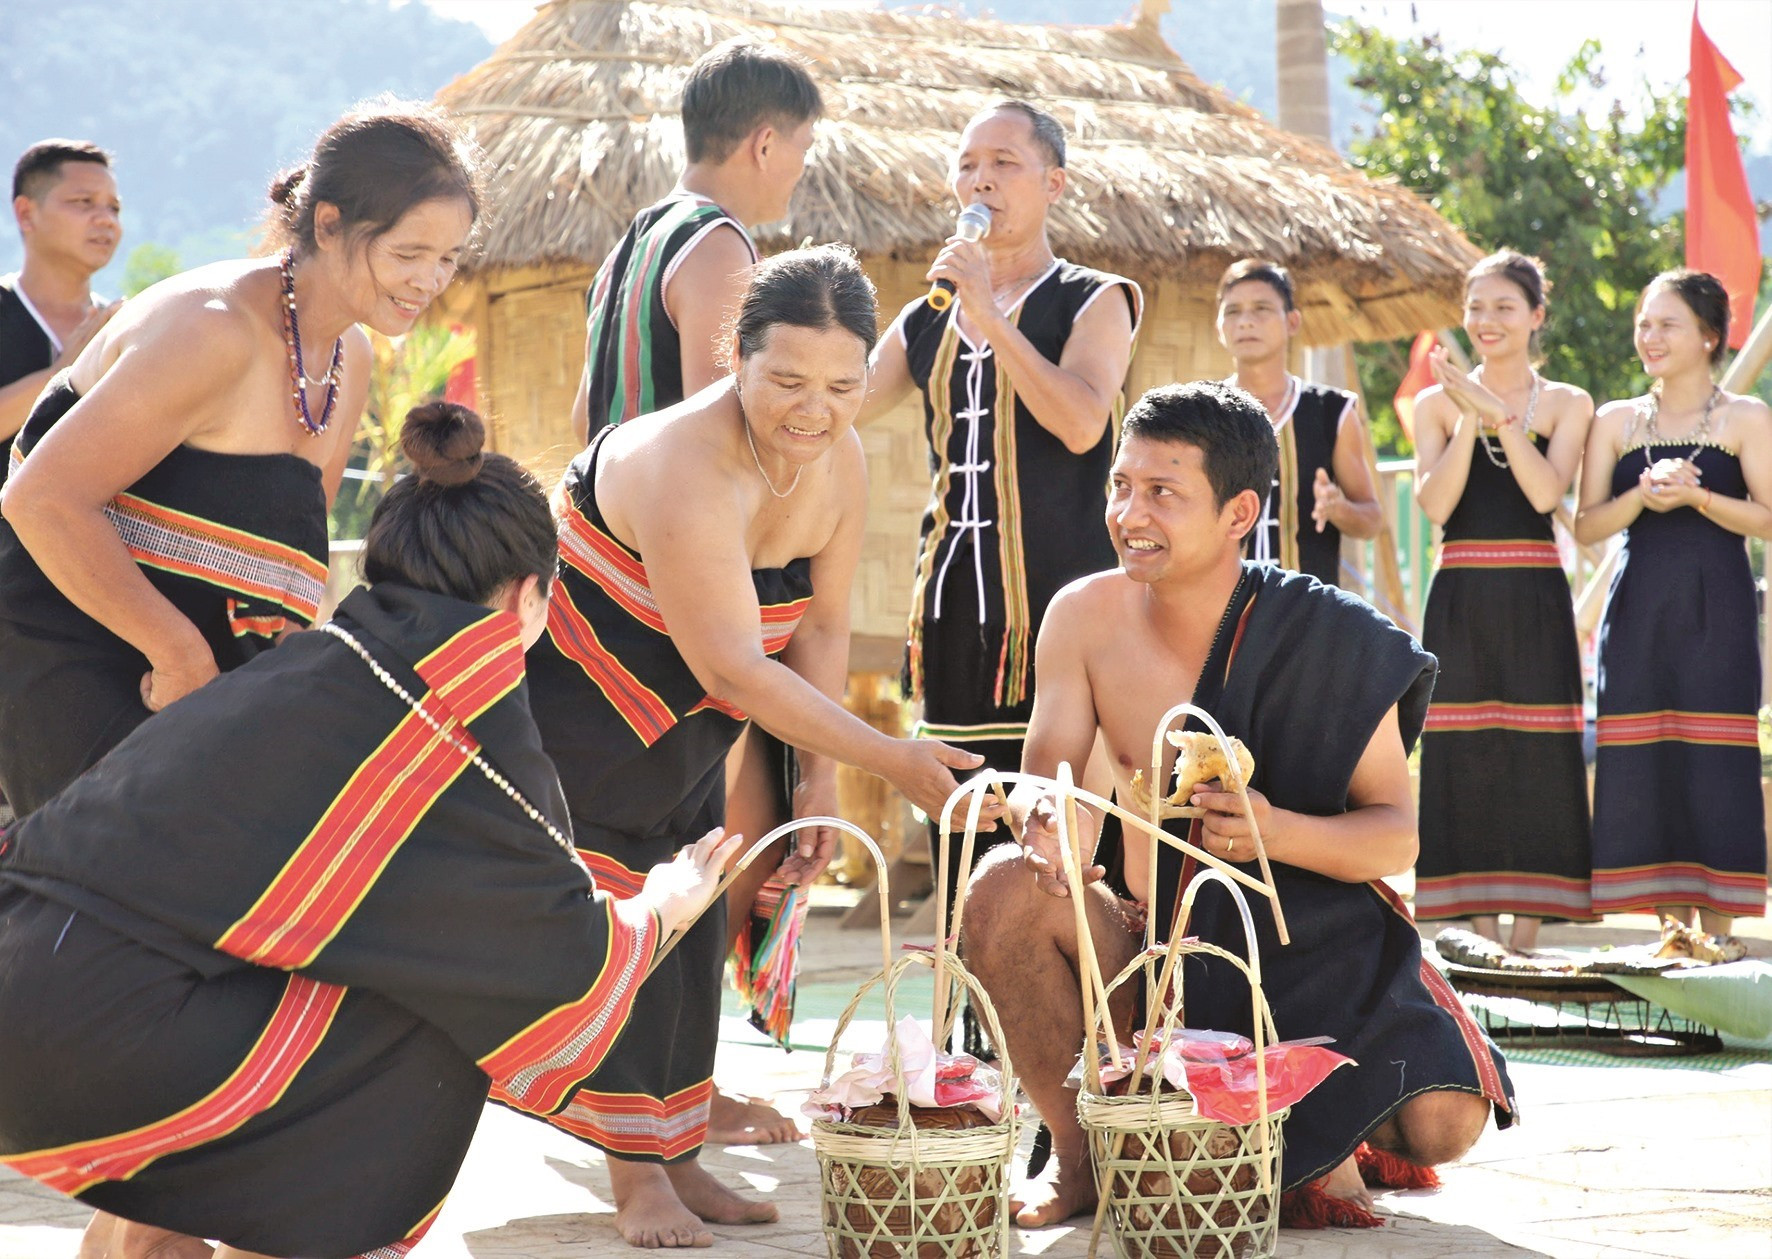 Various activities in the Ve ethnic group’s traditional wedding ceremony, such as singing and drinking wine together.